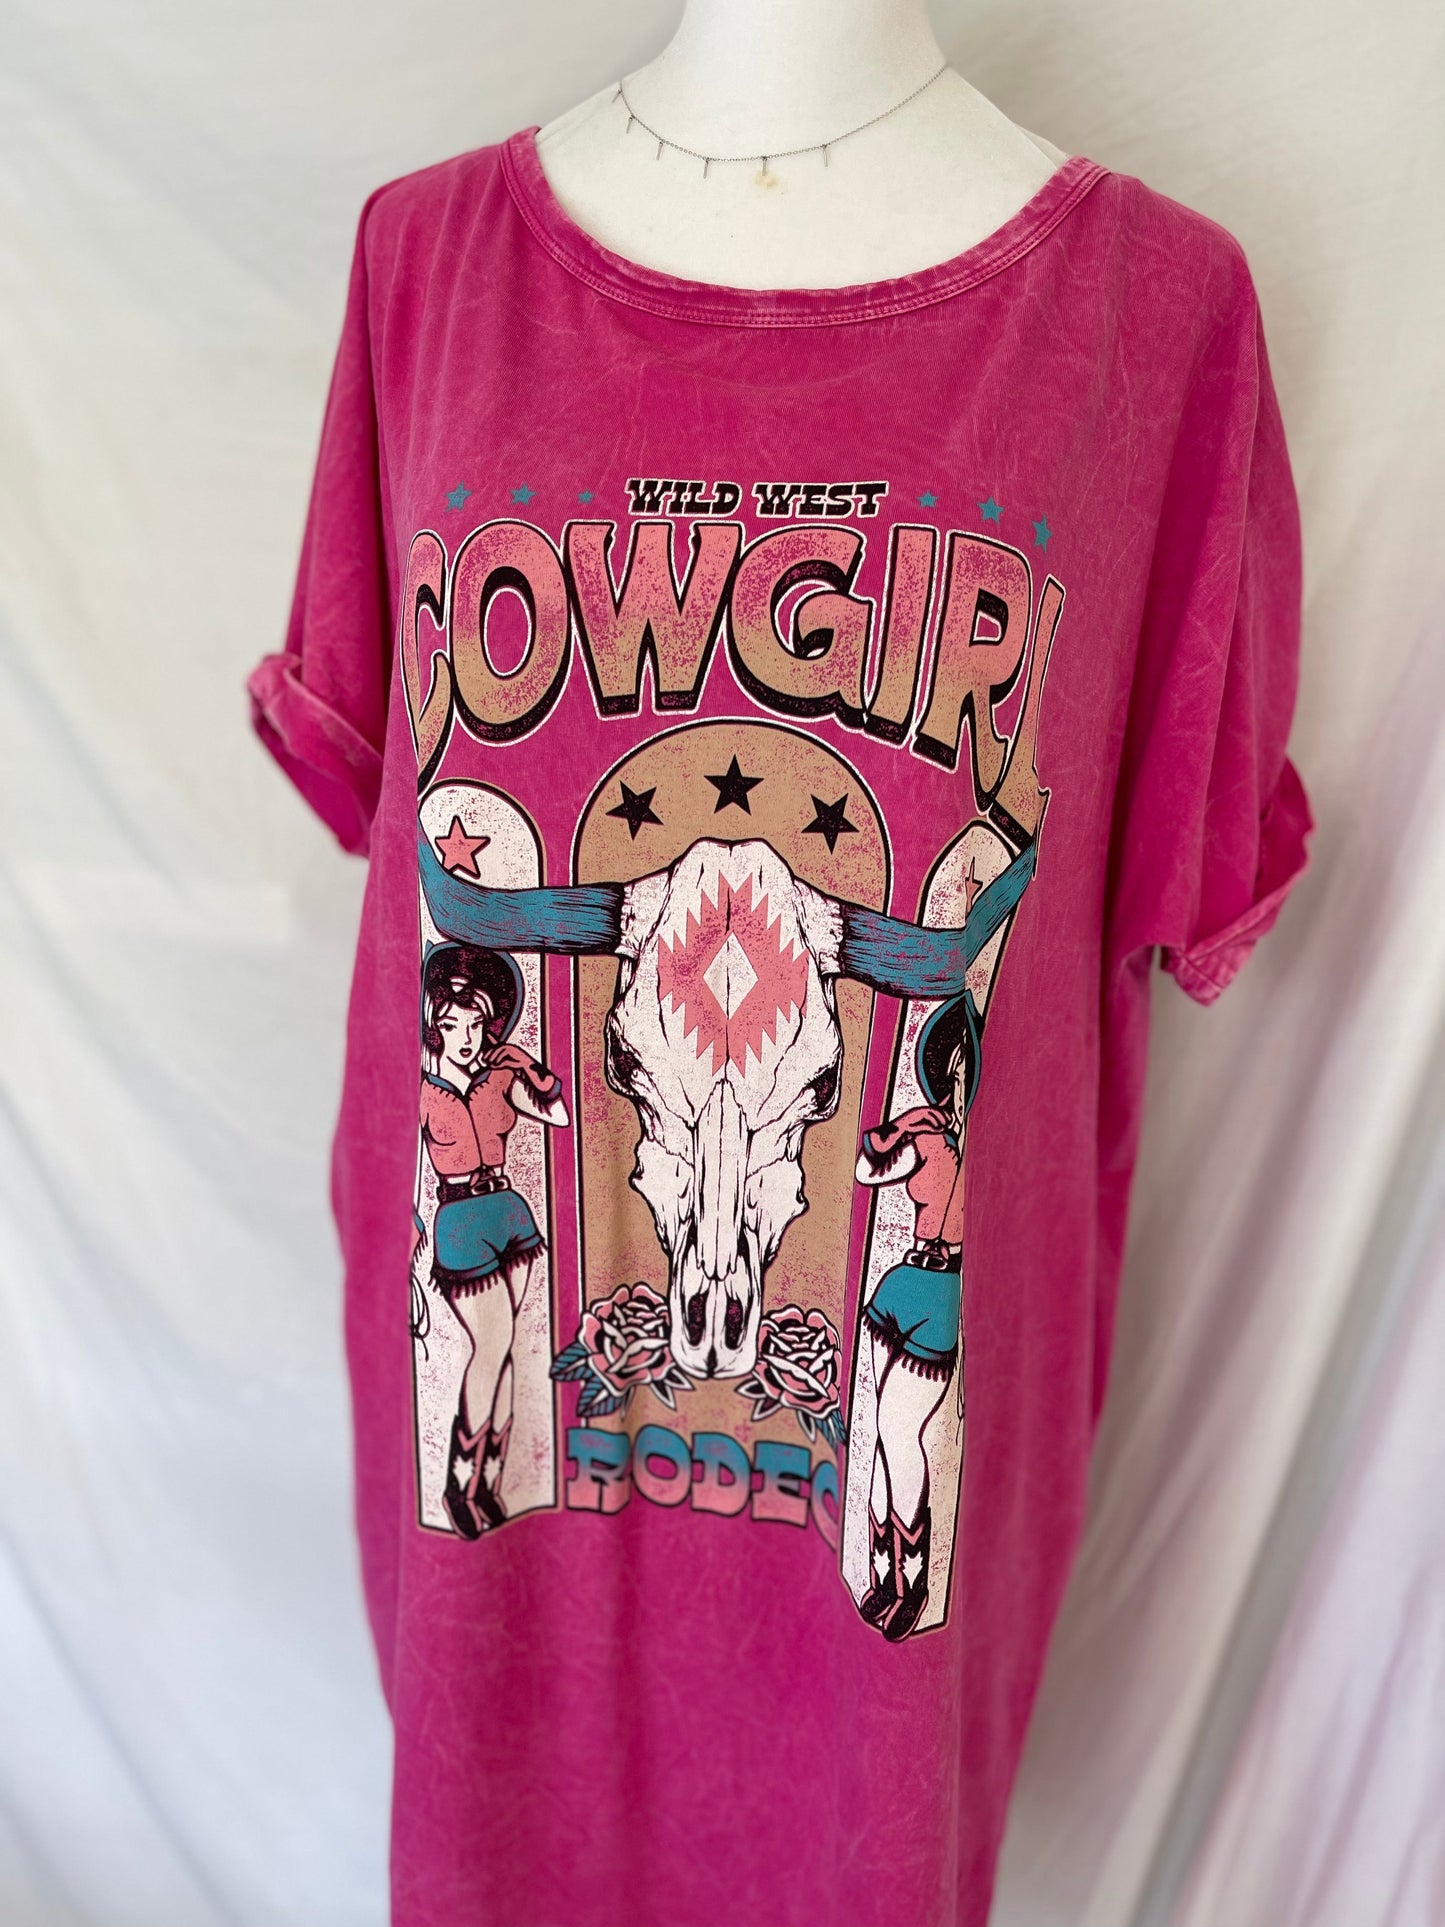 Cowgirl Rodeo Dress